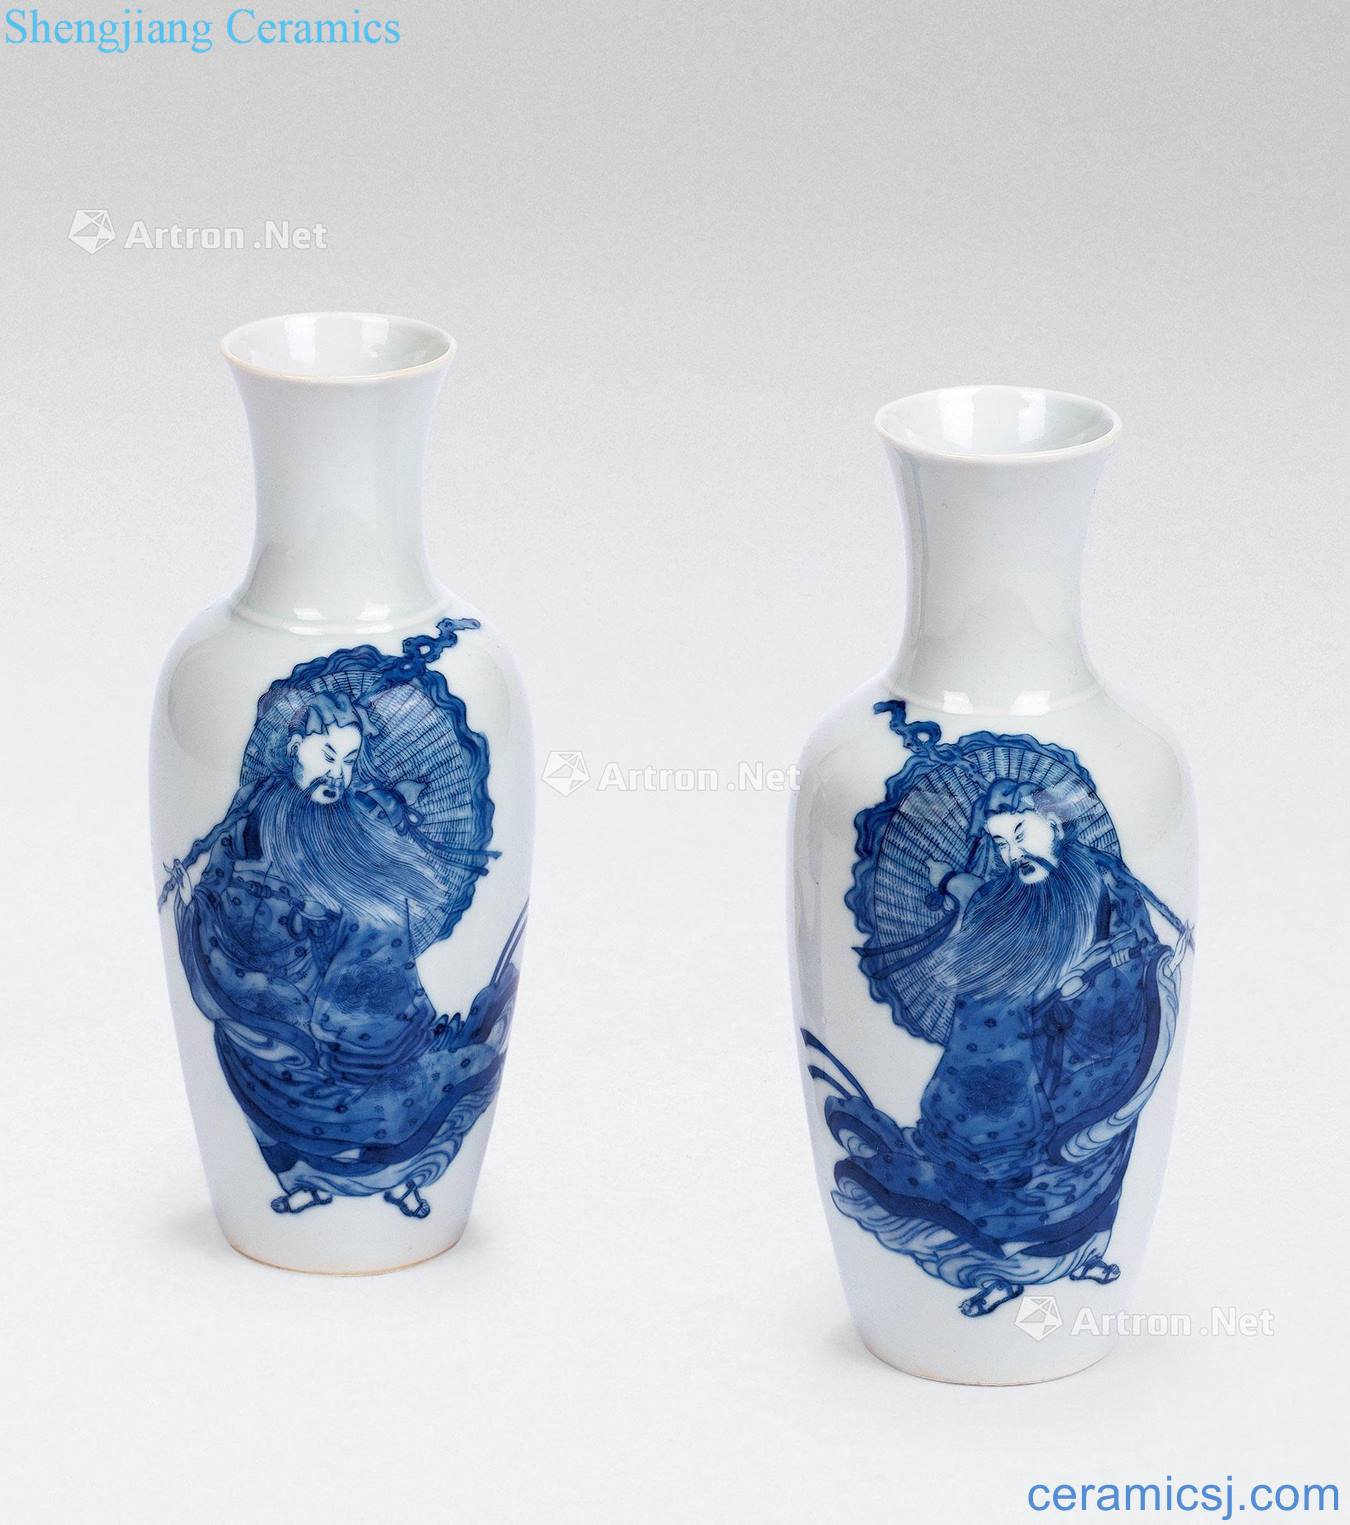 Qing dynasty blue and white figure bottles (a)